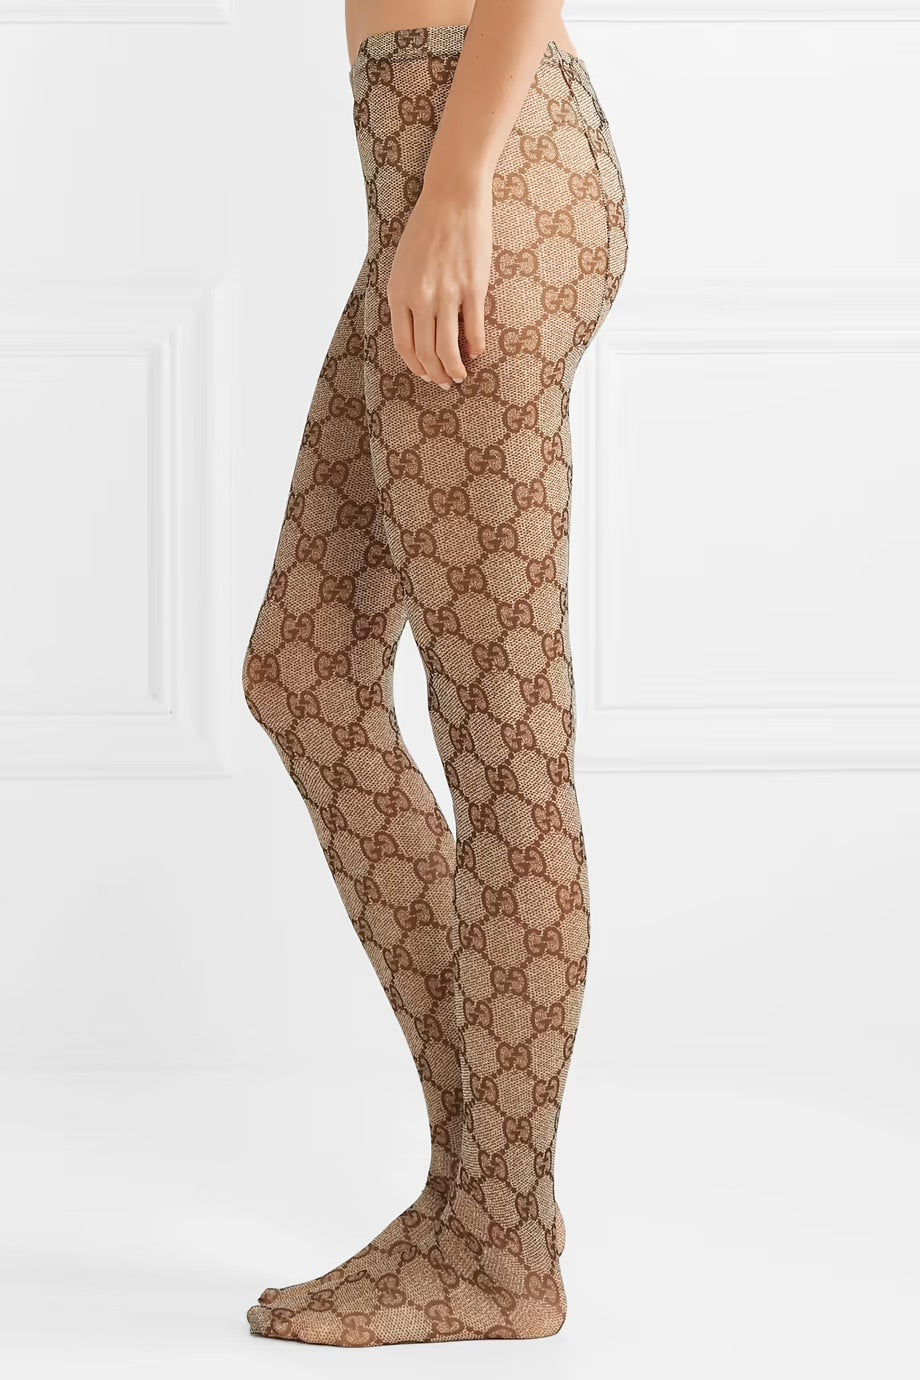 Midas Touch Collection - GUCCI inspired GG tights restocked 155zmk